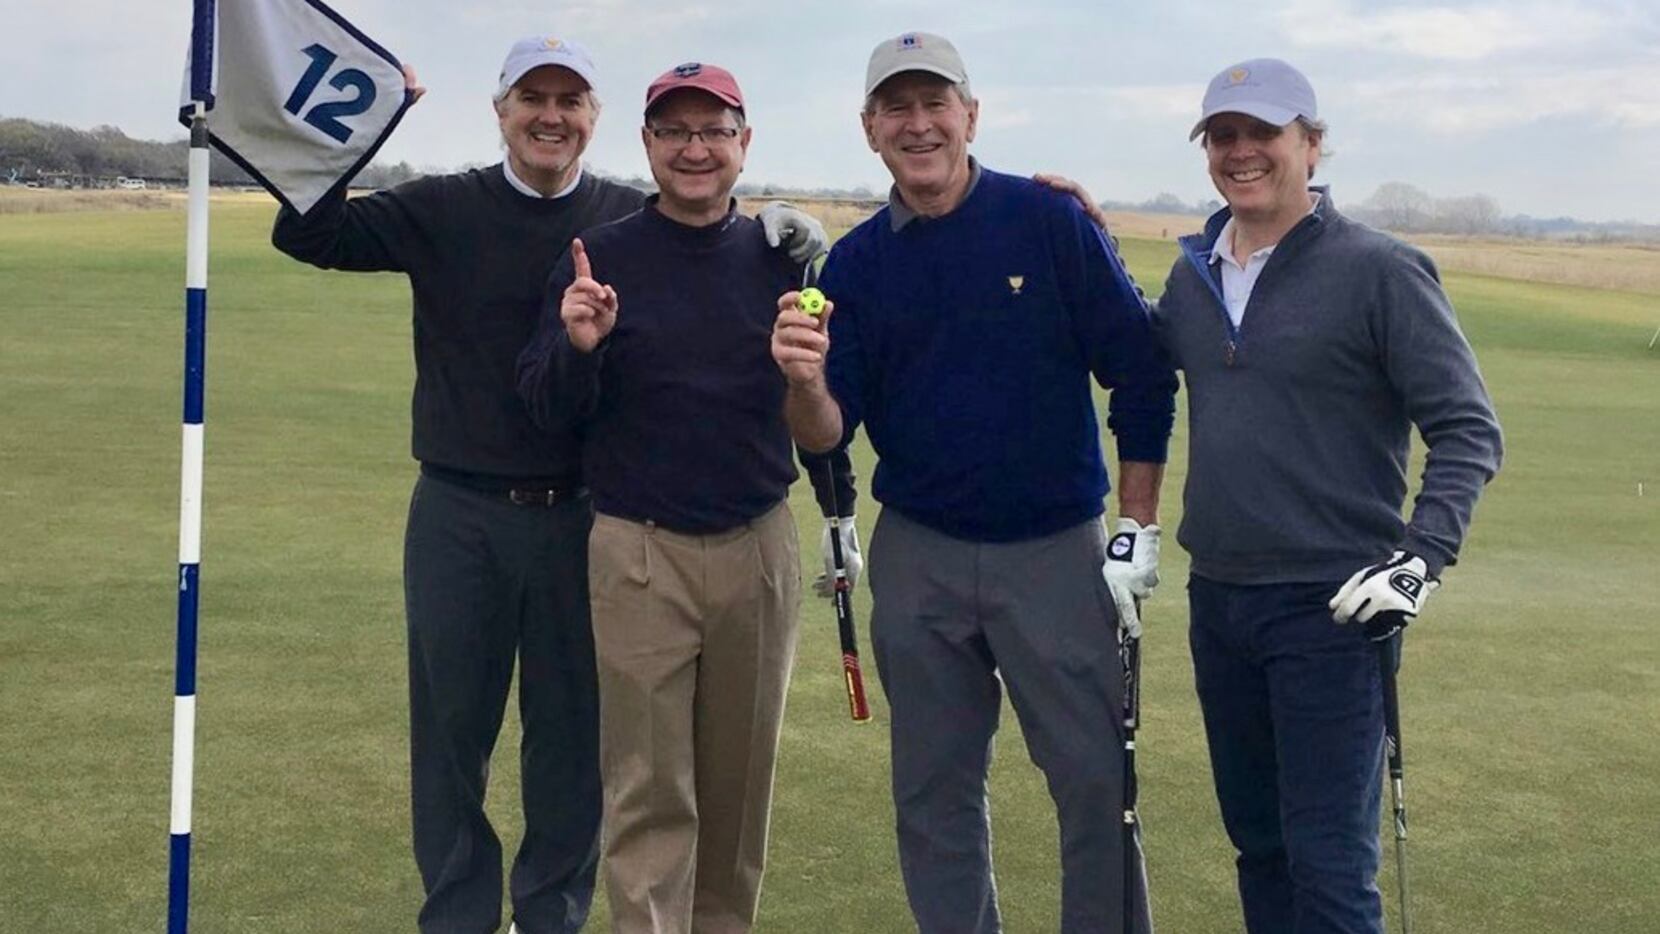 George W Bush celebrates his hole in one on 12 at Trinity Forest.